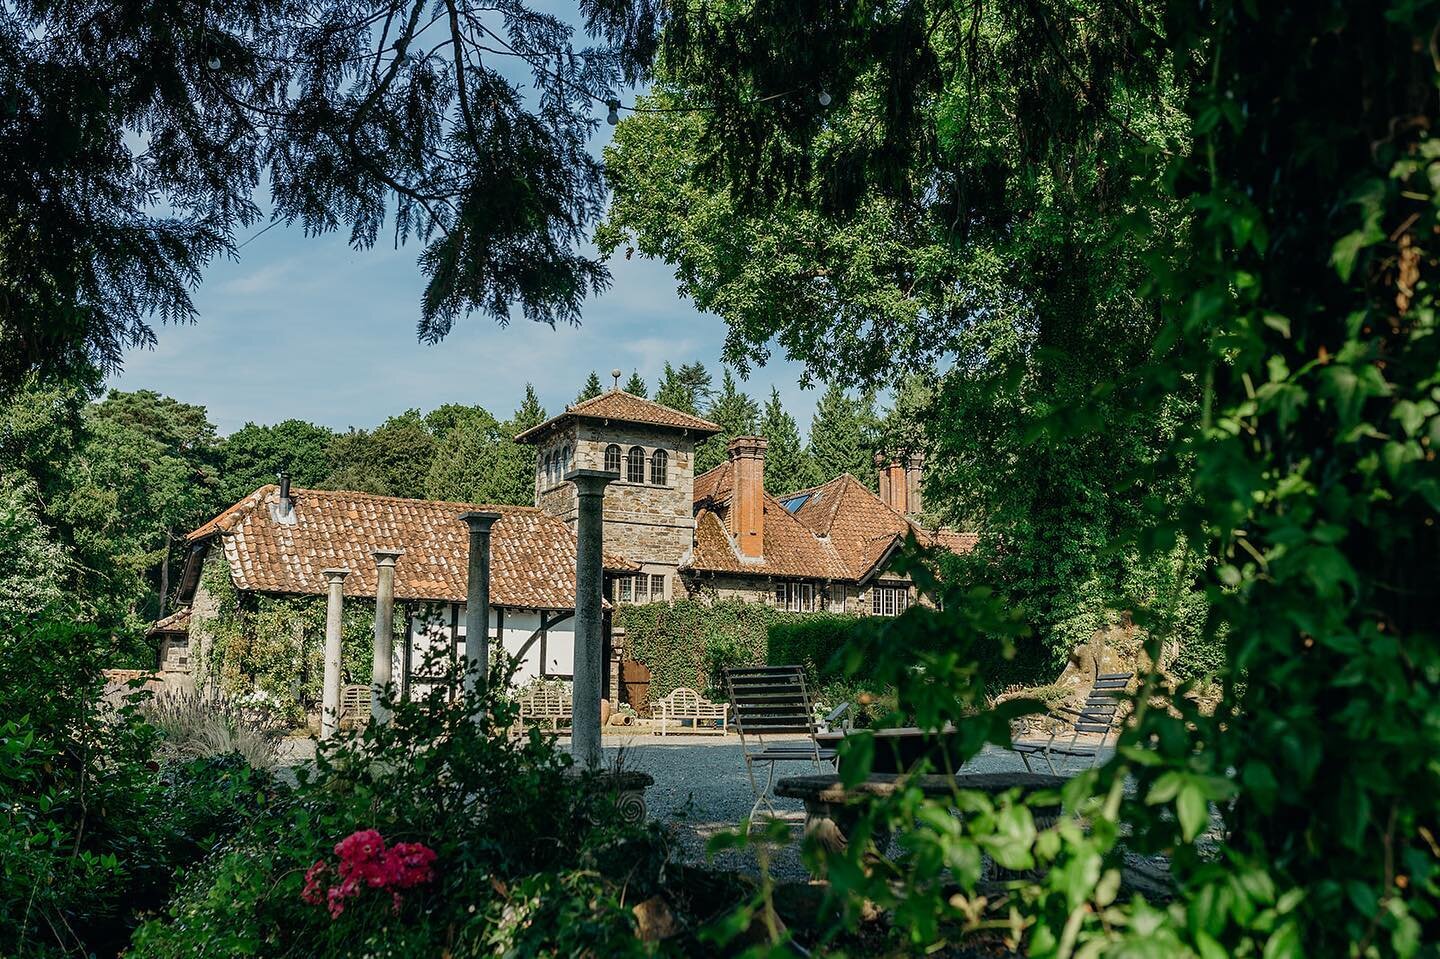 The Italian Terrace could fool you of its Devon location on Spring &amp; Summer days like these ☀️

📸 @clarekinchinphotography 

#coombetrenchardweddings #coombetrenchard #devonweddingvenue #westcountrywedding #ukwedding #countryhousewedding #weddin